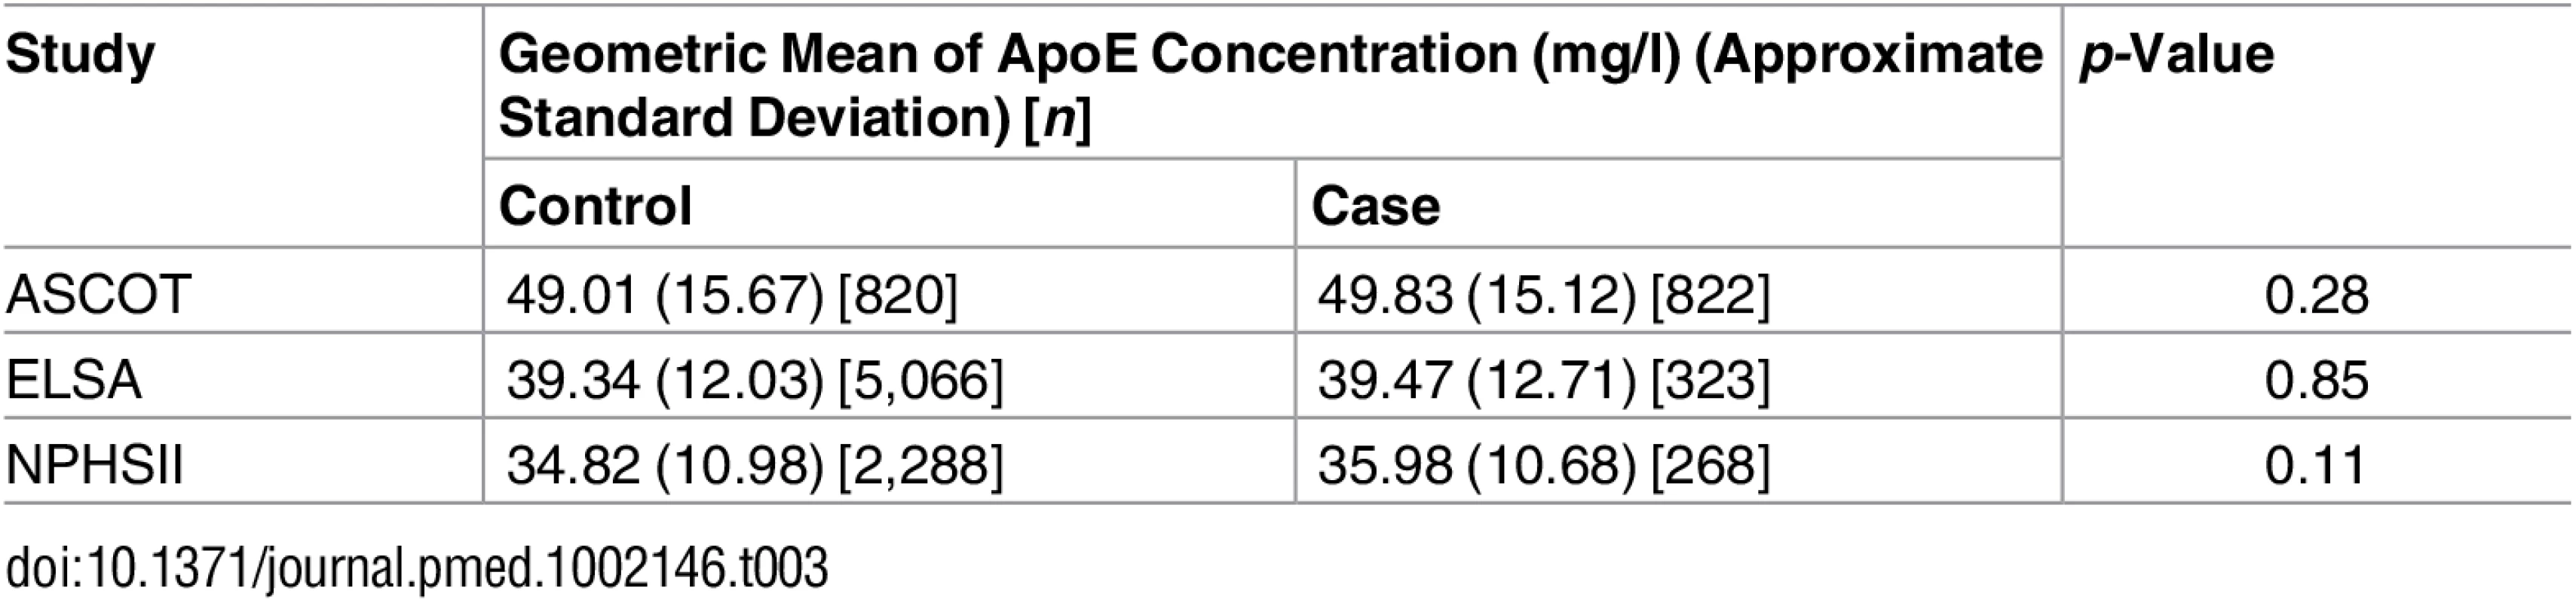 ApoE concentrations in individuals who later developed cardiovascular disease by case/control status in all three studies.